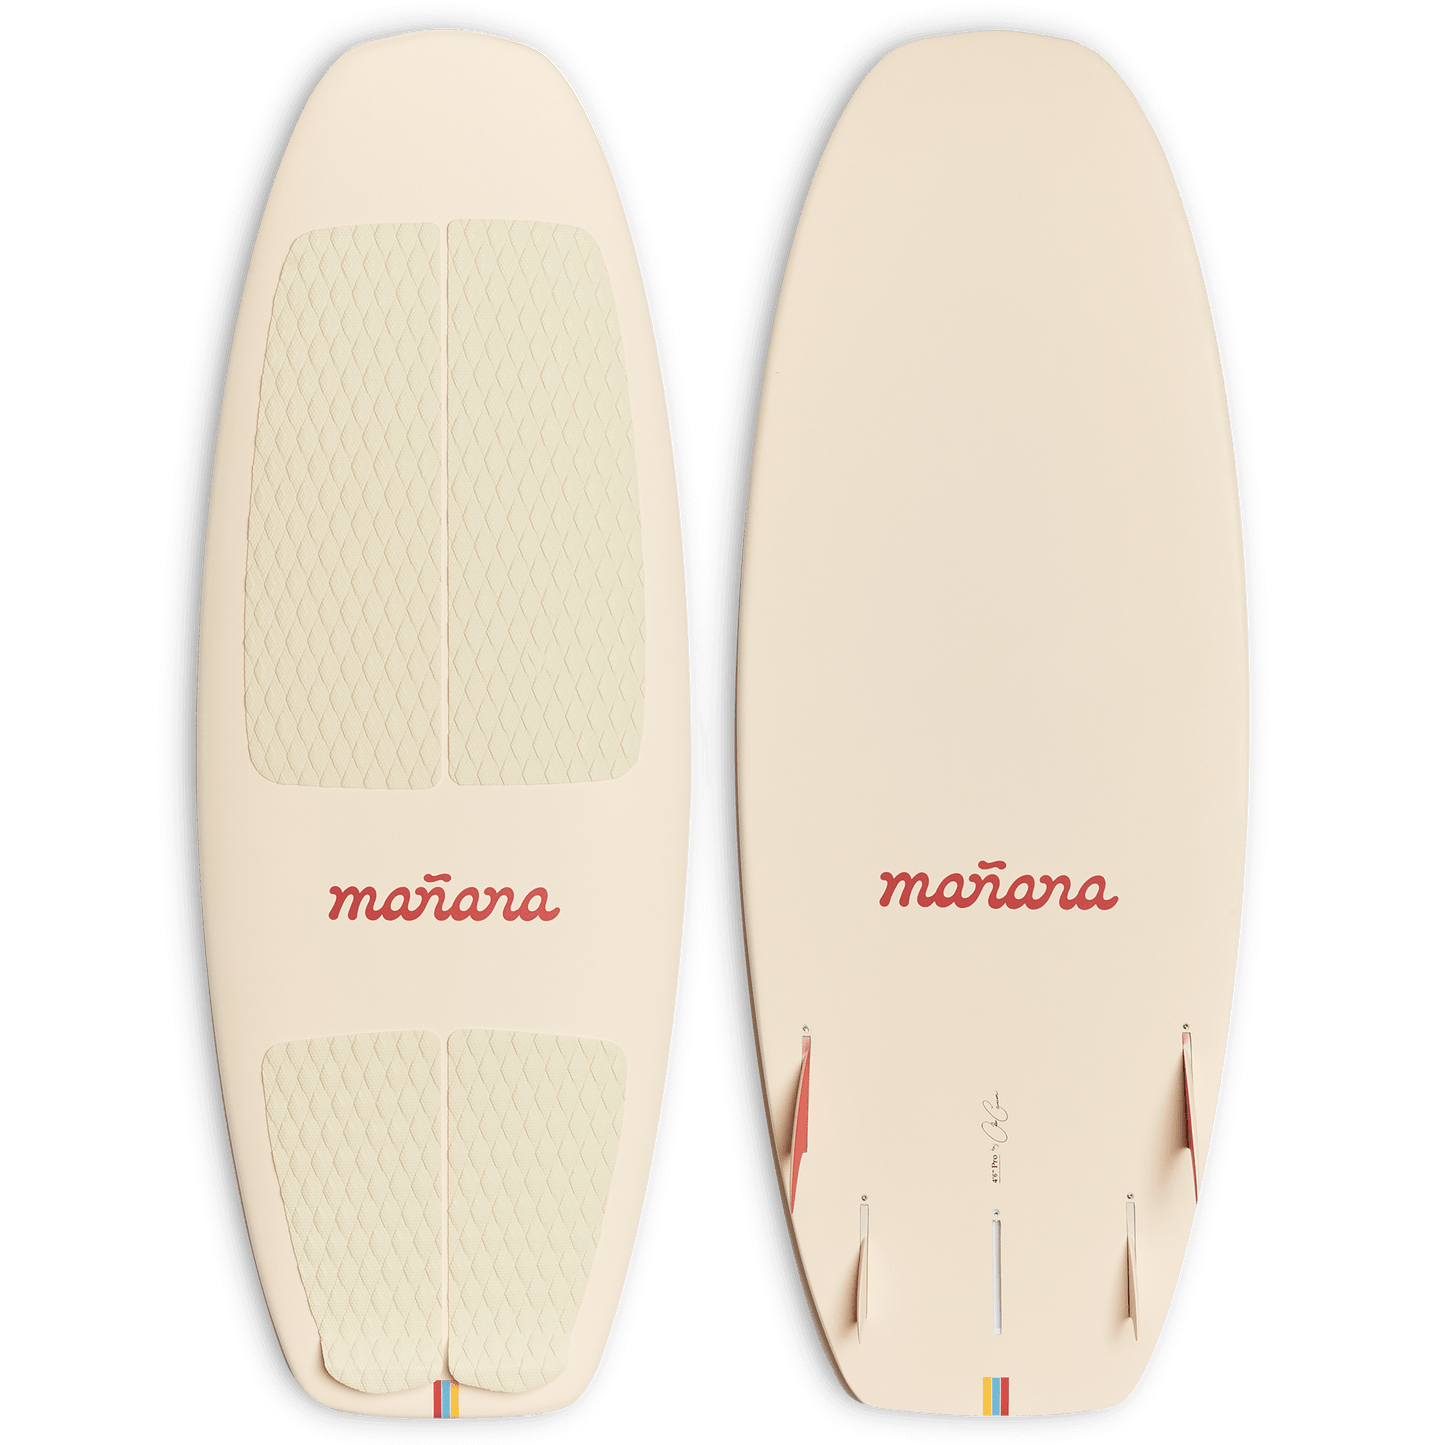 Off-White Terry Surfboard with Manana branding